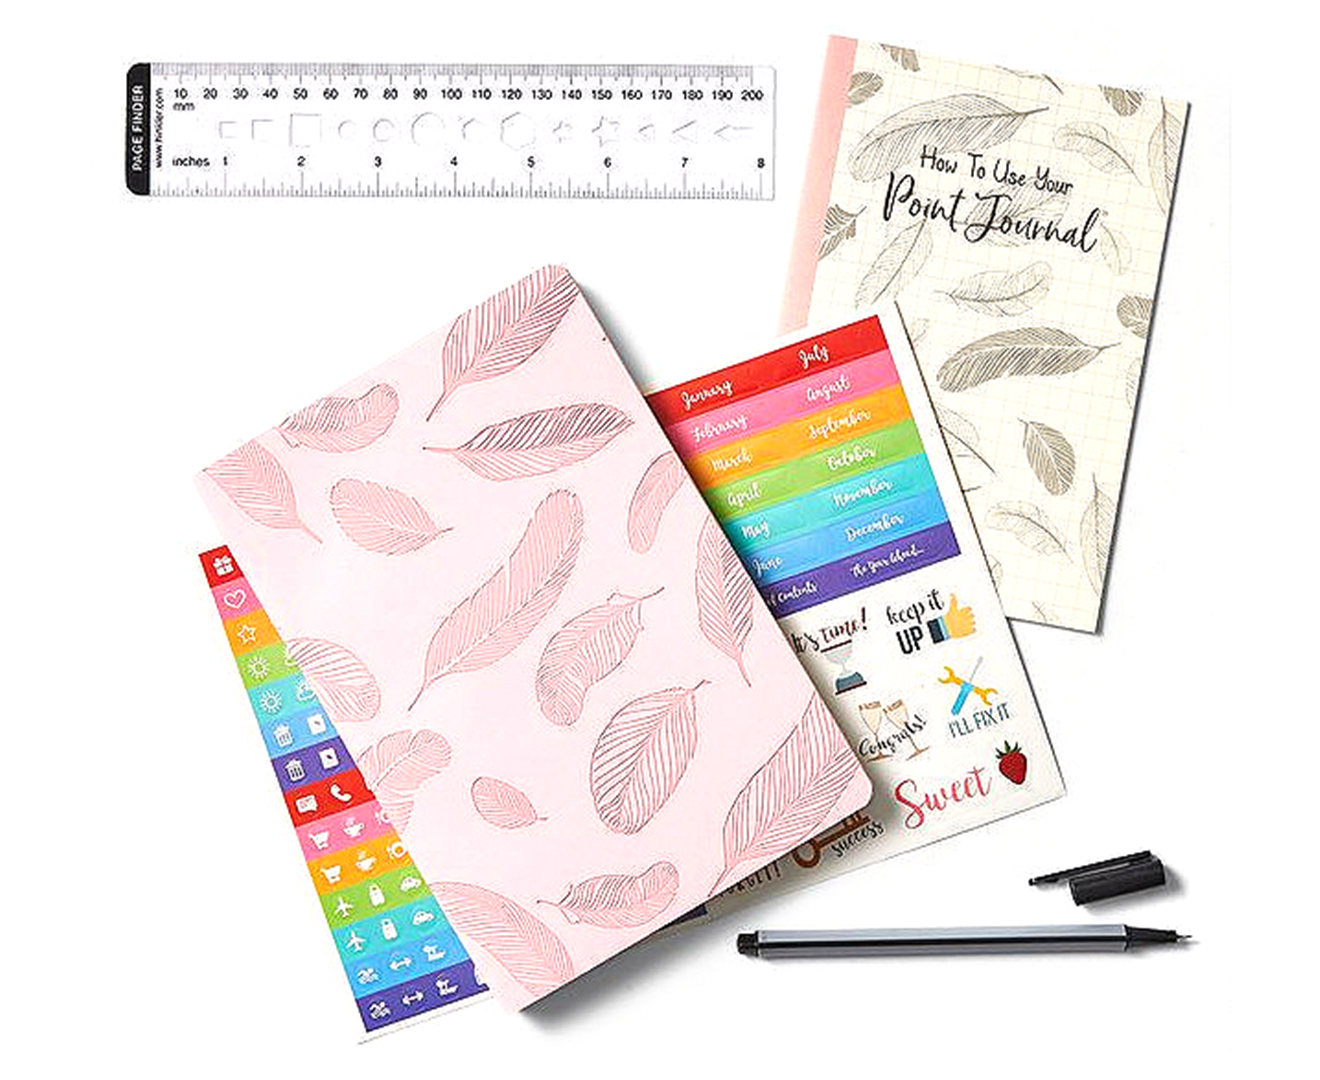 Point Journal Kit - Diaries - Stationery - Adults - Hinkler